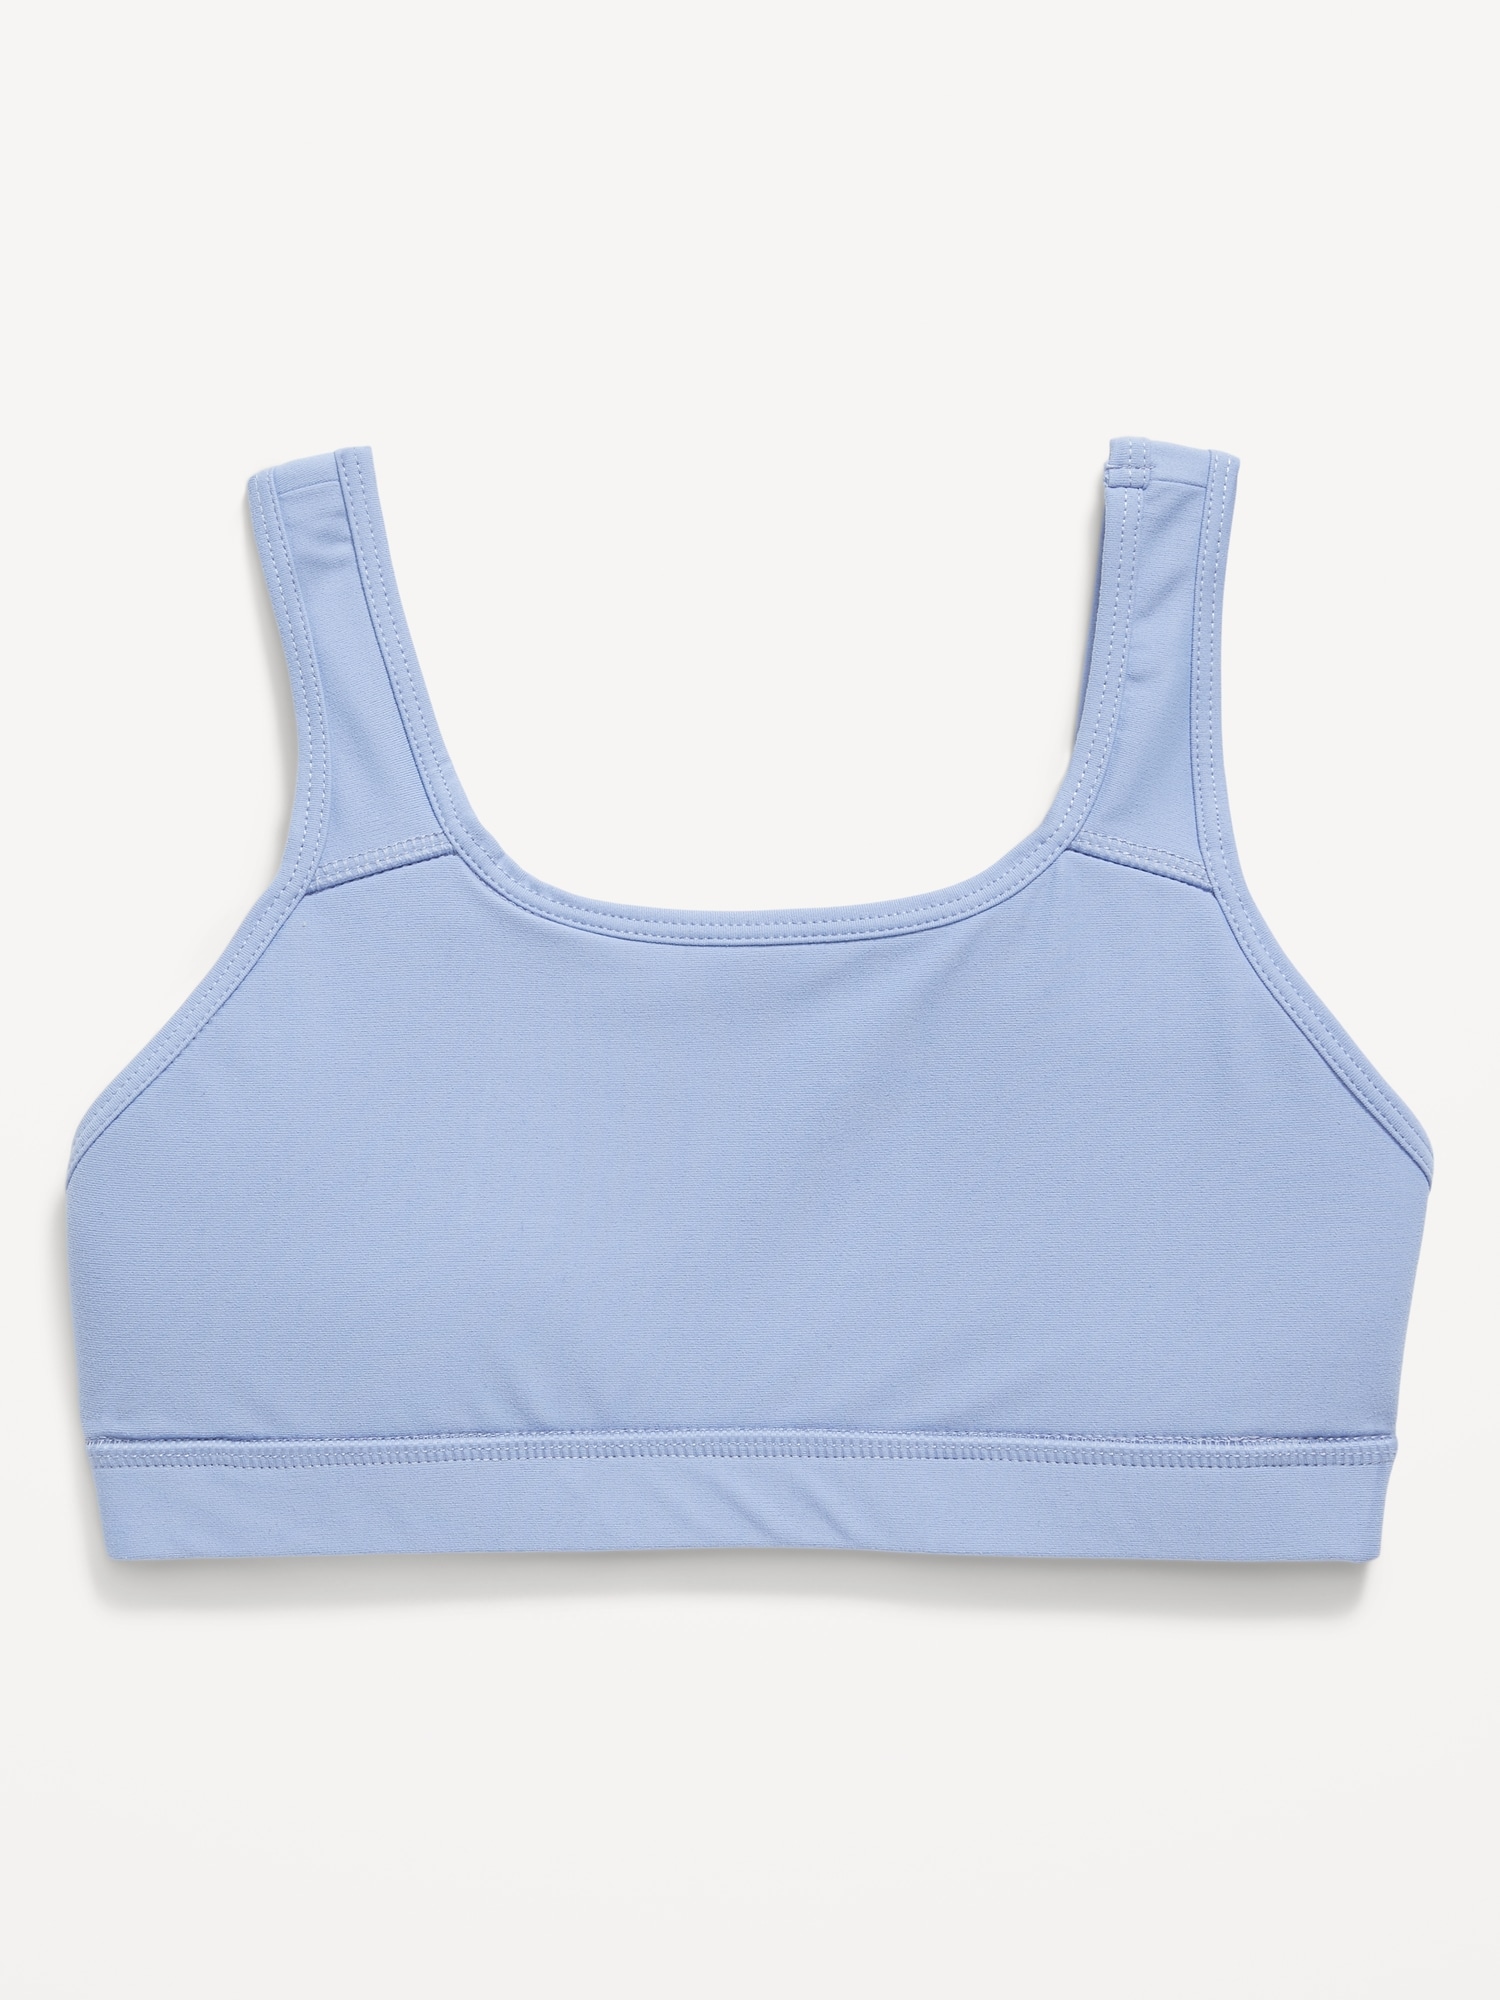 Sports Bra For Teenager - Buy Sports Bra For Teenager online at